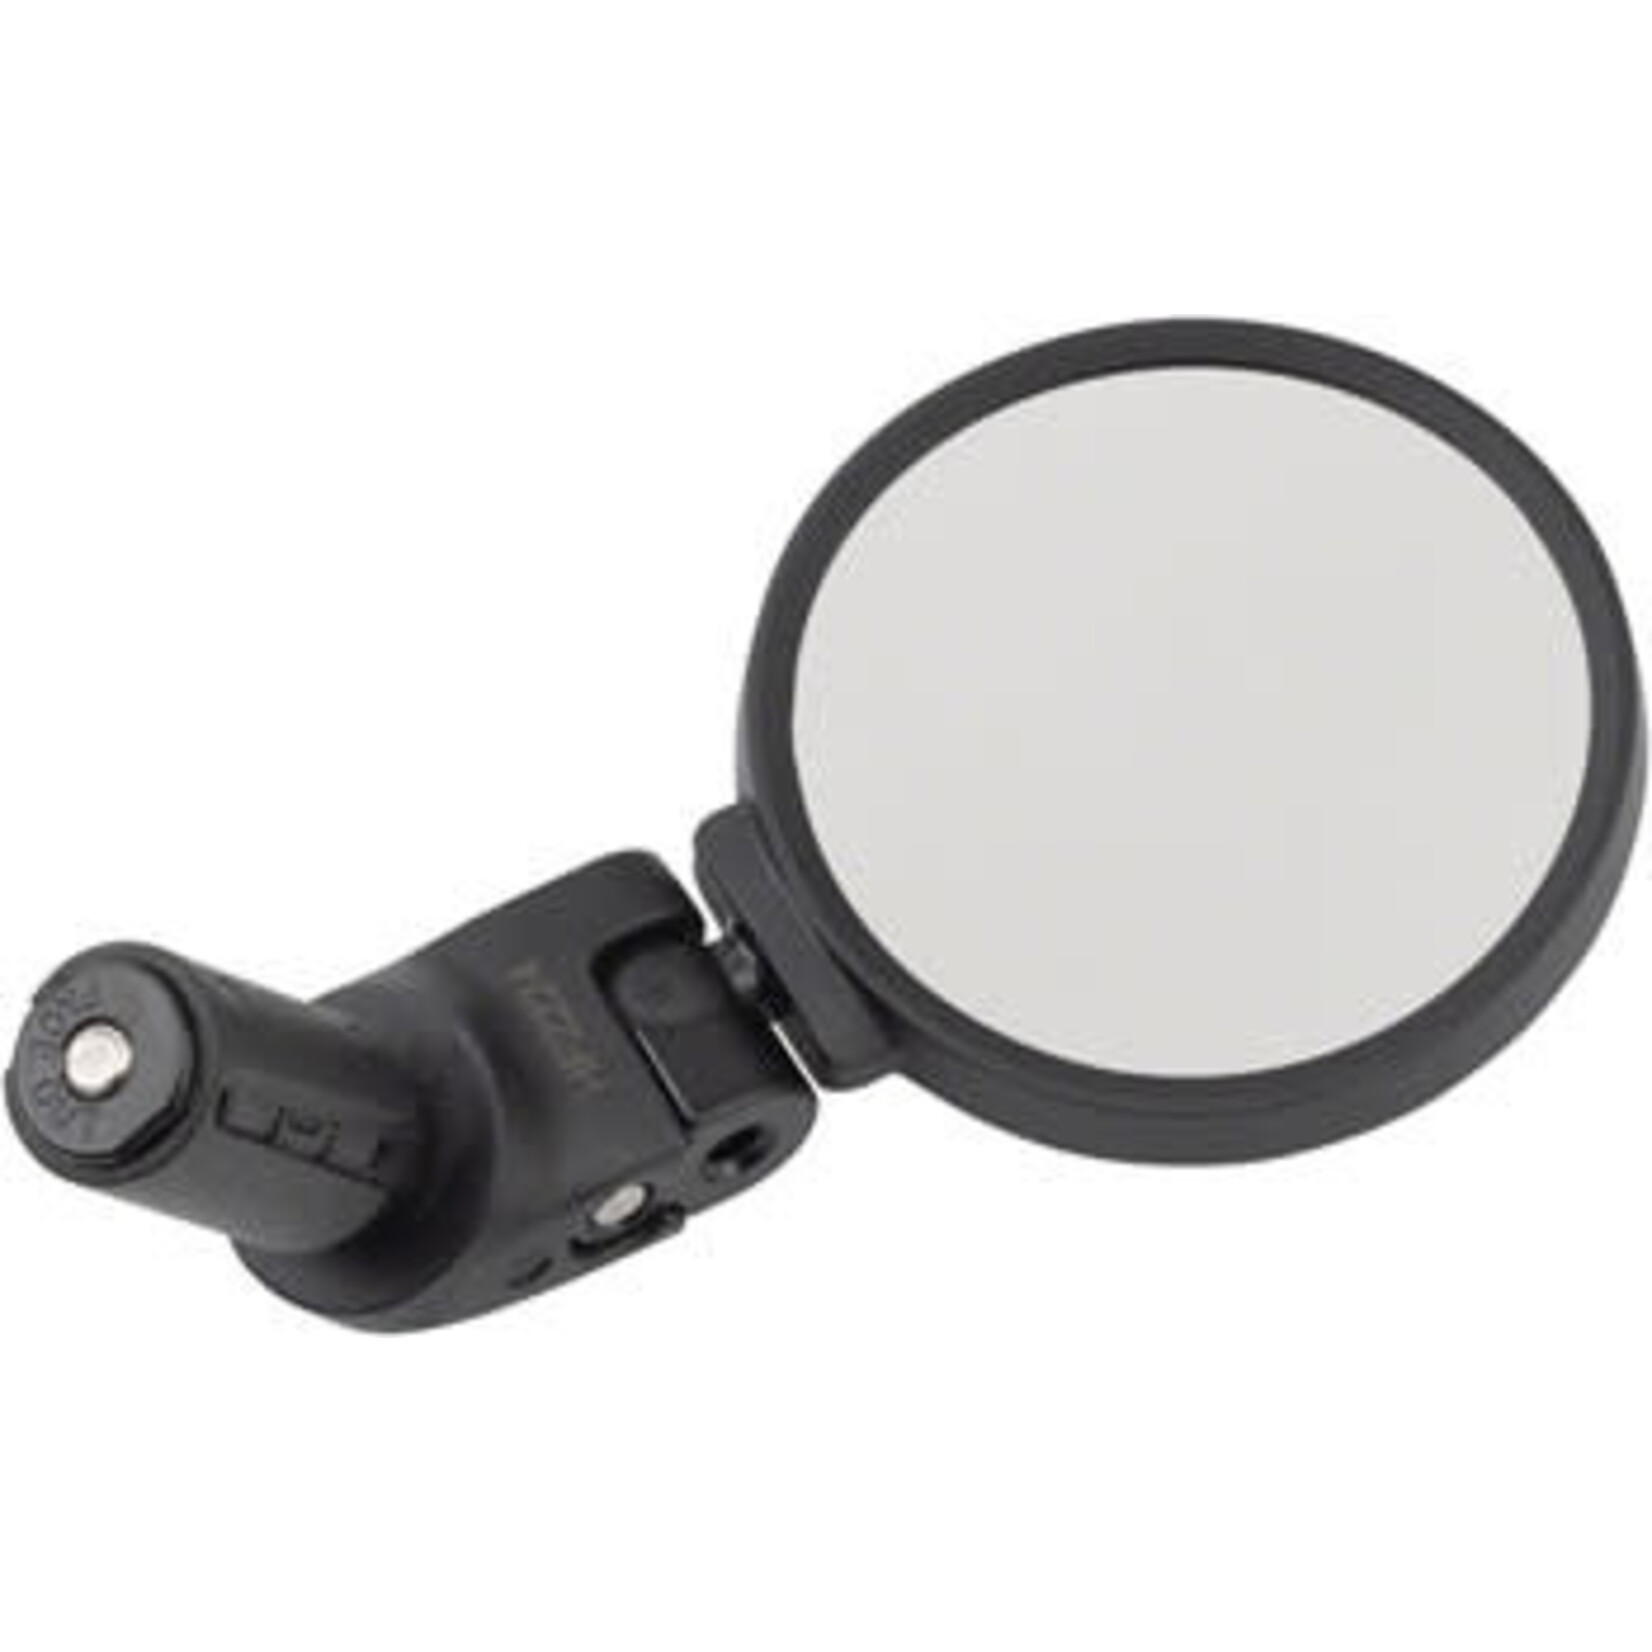 MSW MSW Handlebar Mirror - Flat and Drop Bar, Stainless Steel Lens